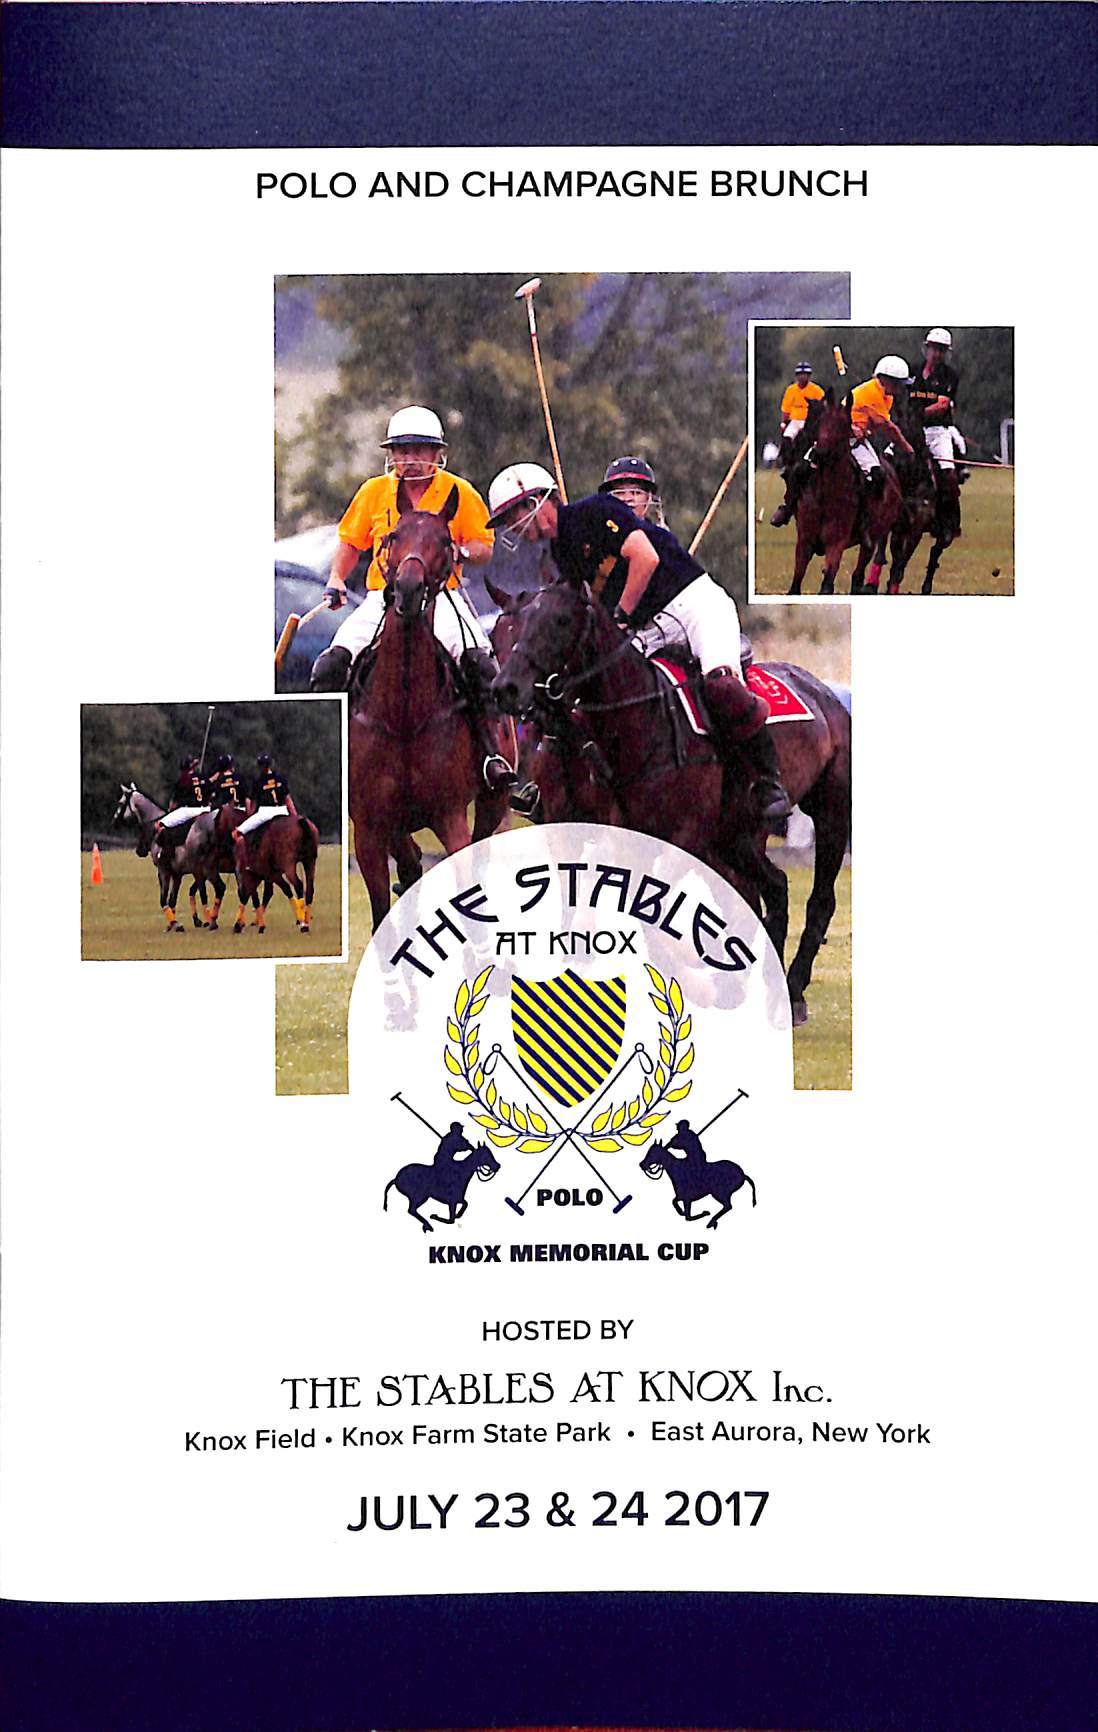 "The Stables at Knox Polo East Aurora, NY" 2017